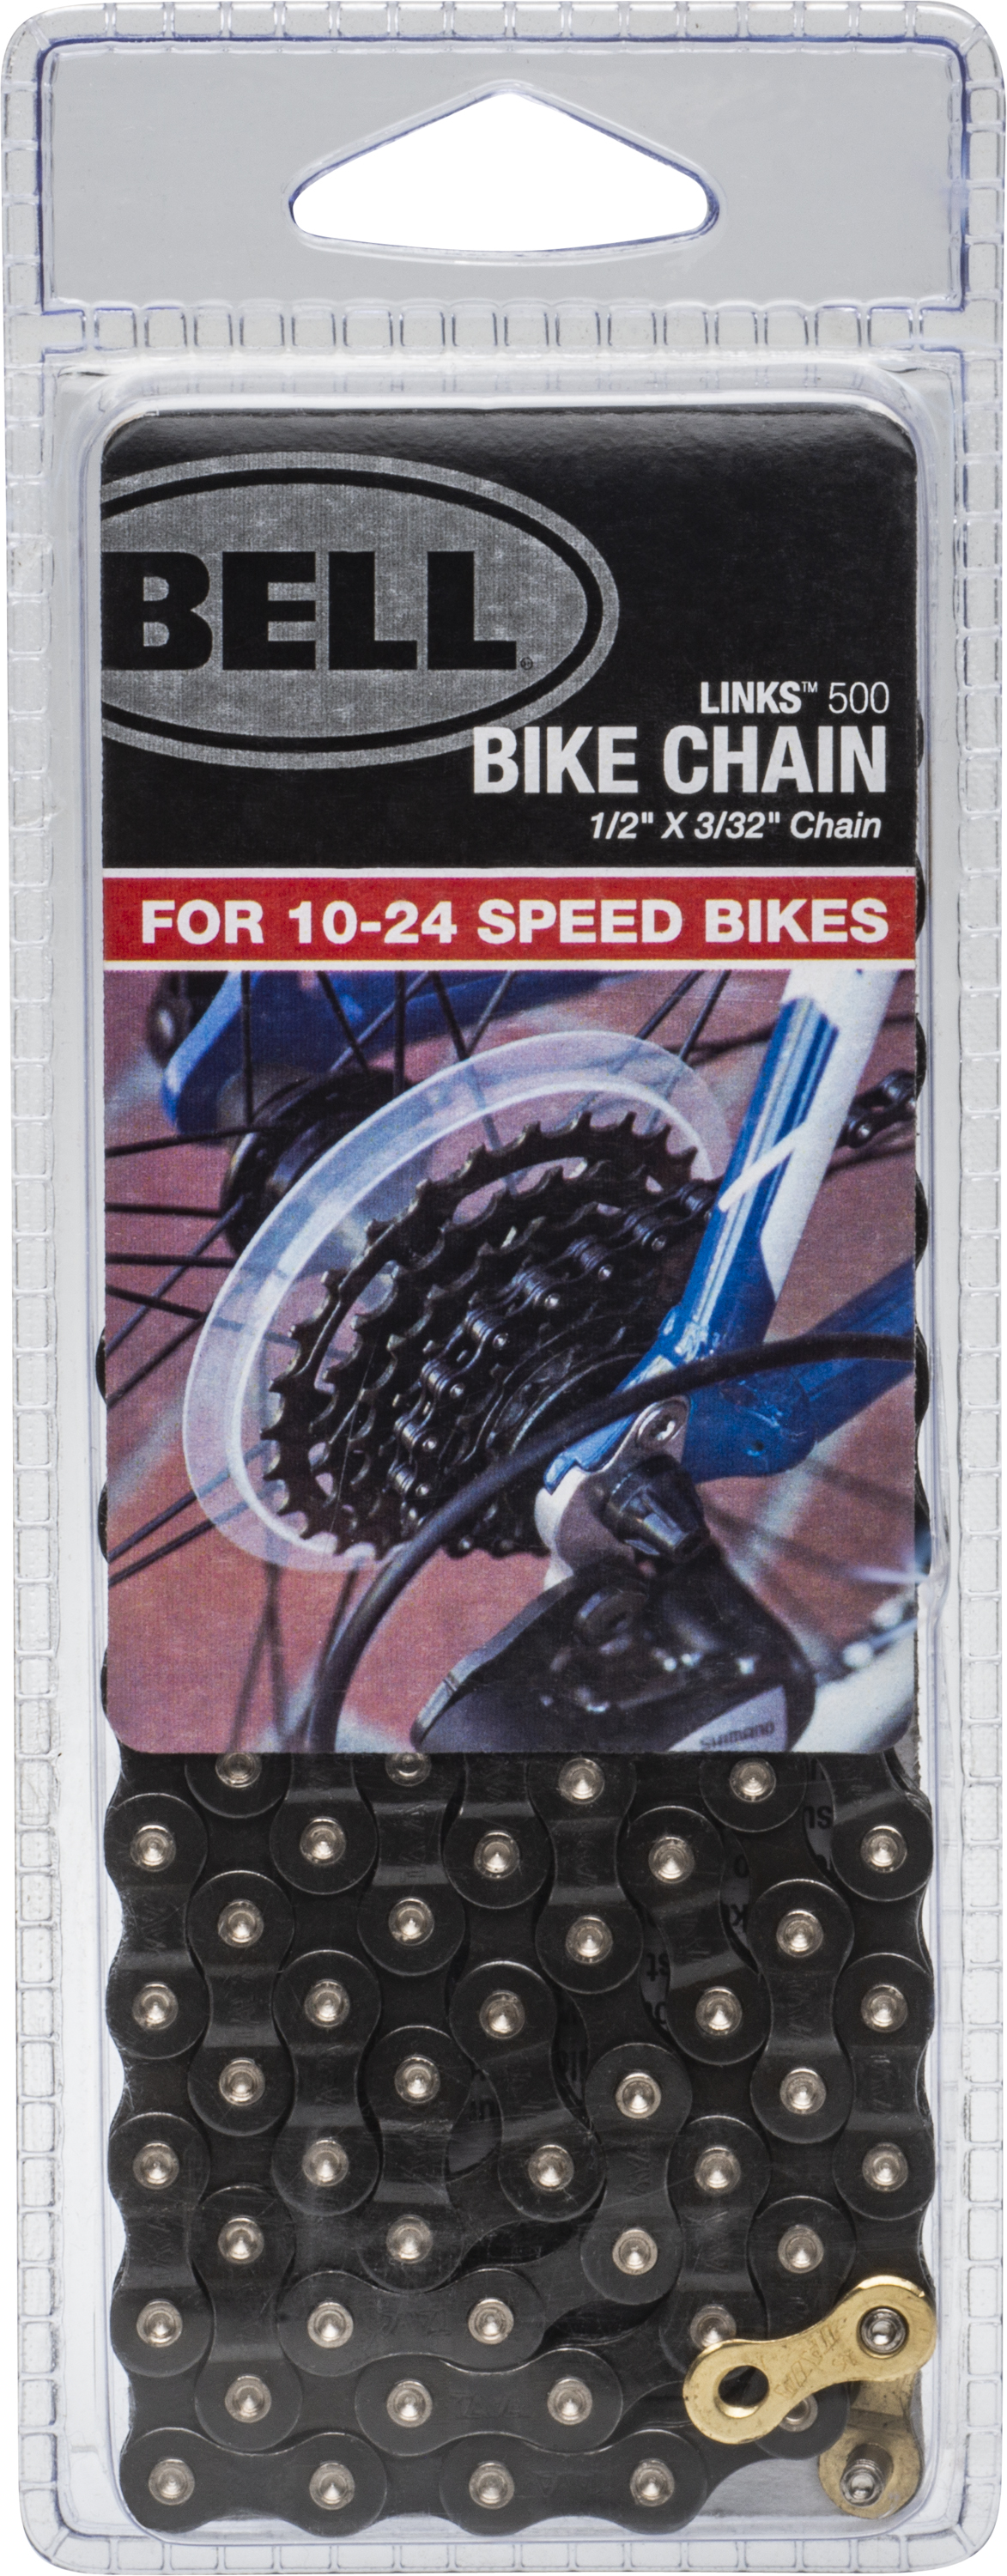 Bell Links 500 Bicycle Chain for 10-24 Speed Bikes, 1/2 inch x 3/32 inch 112 links - image 2 of 3